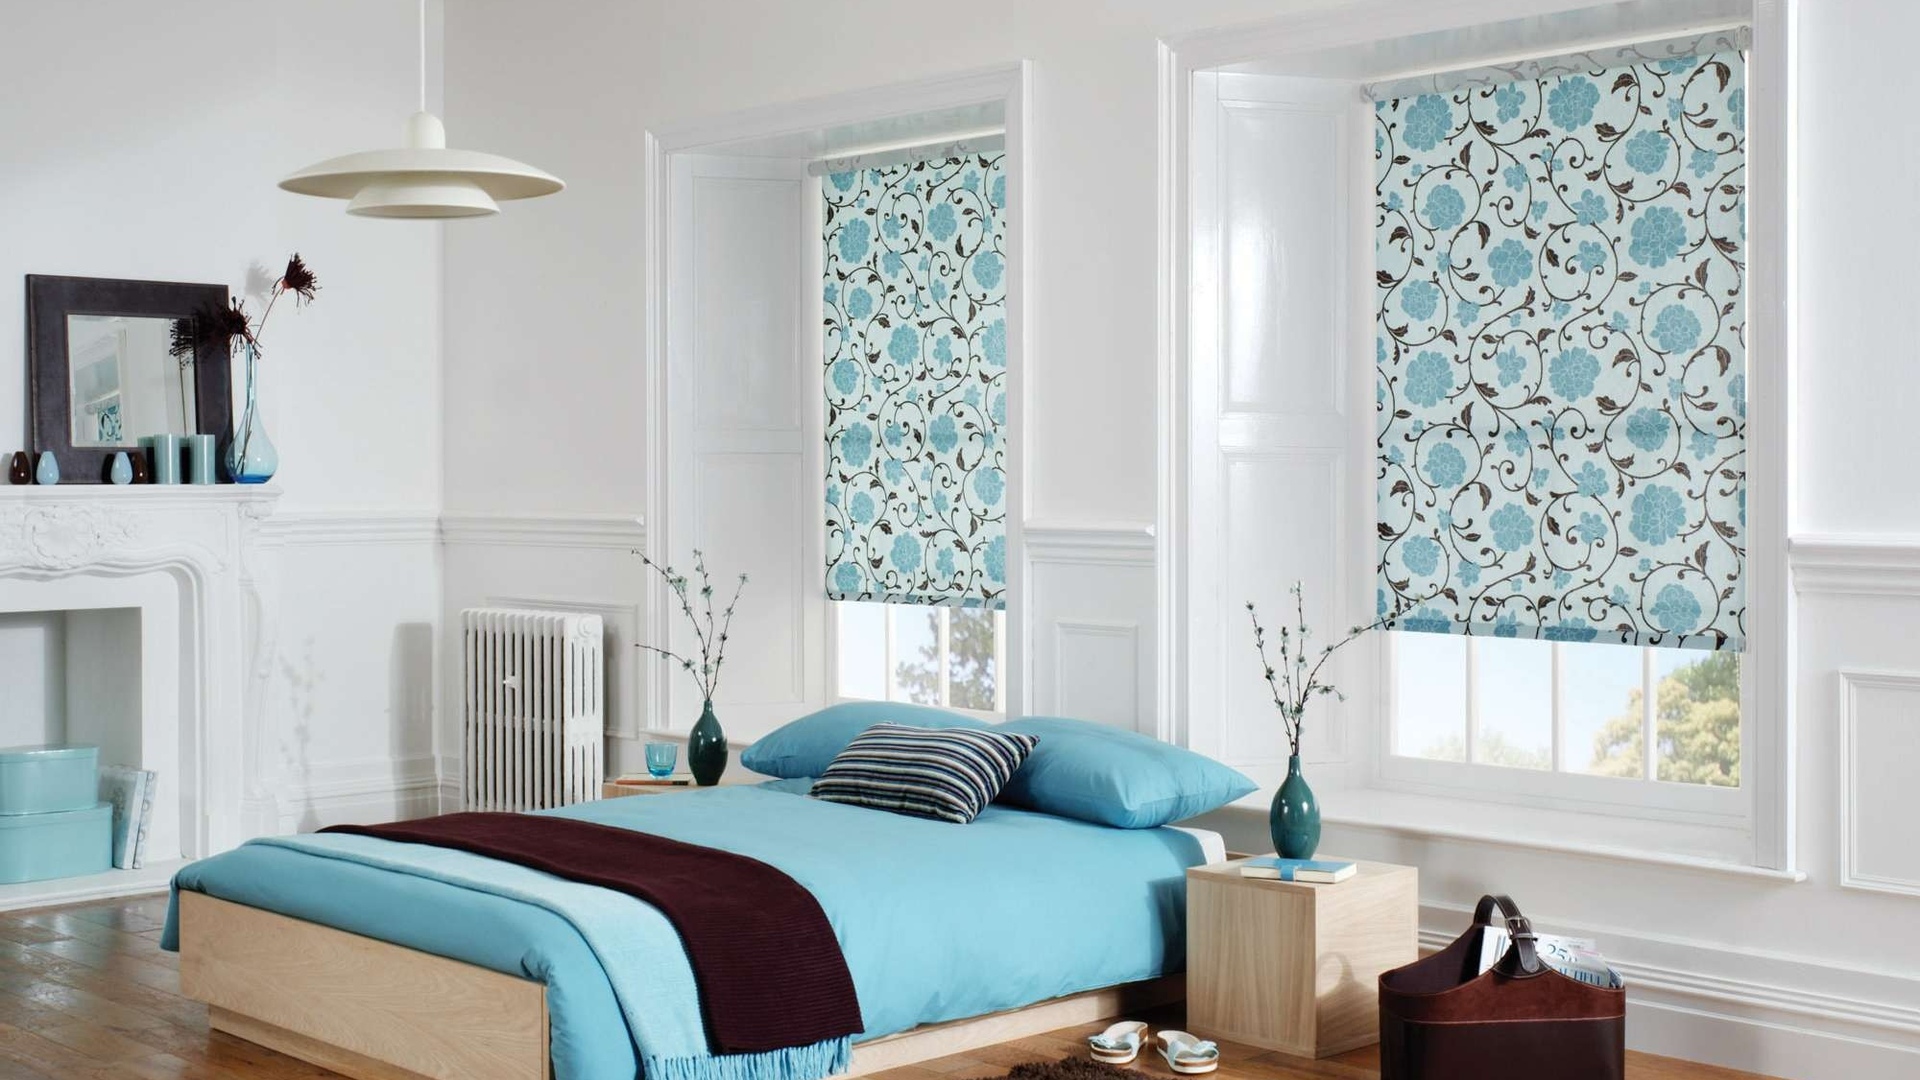 Provence style bedroom wallpaper with window blinds